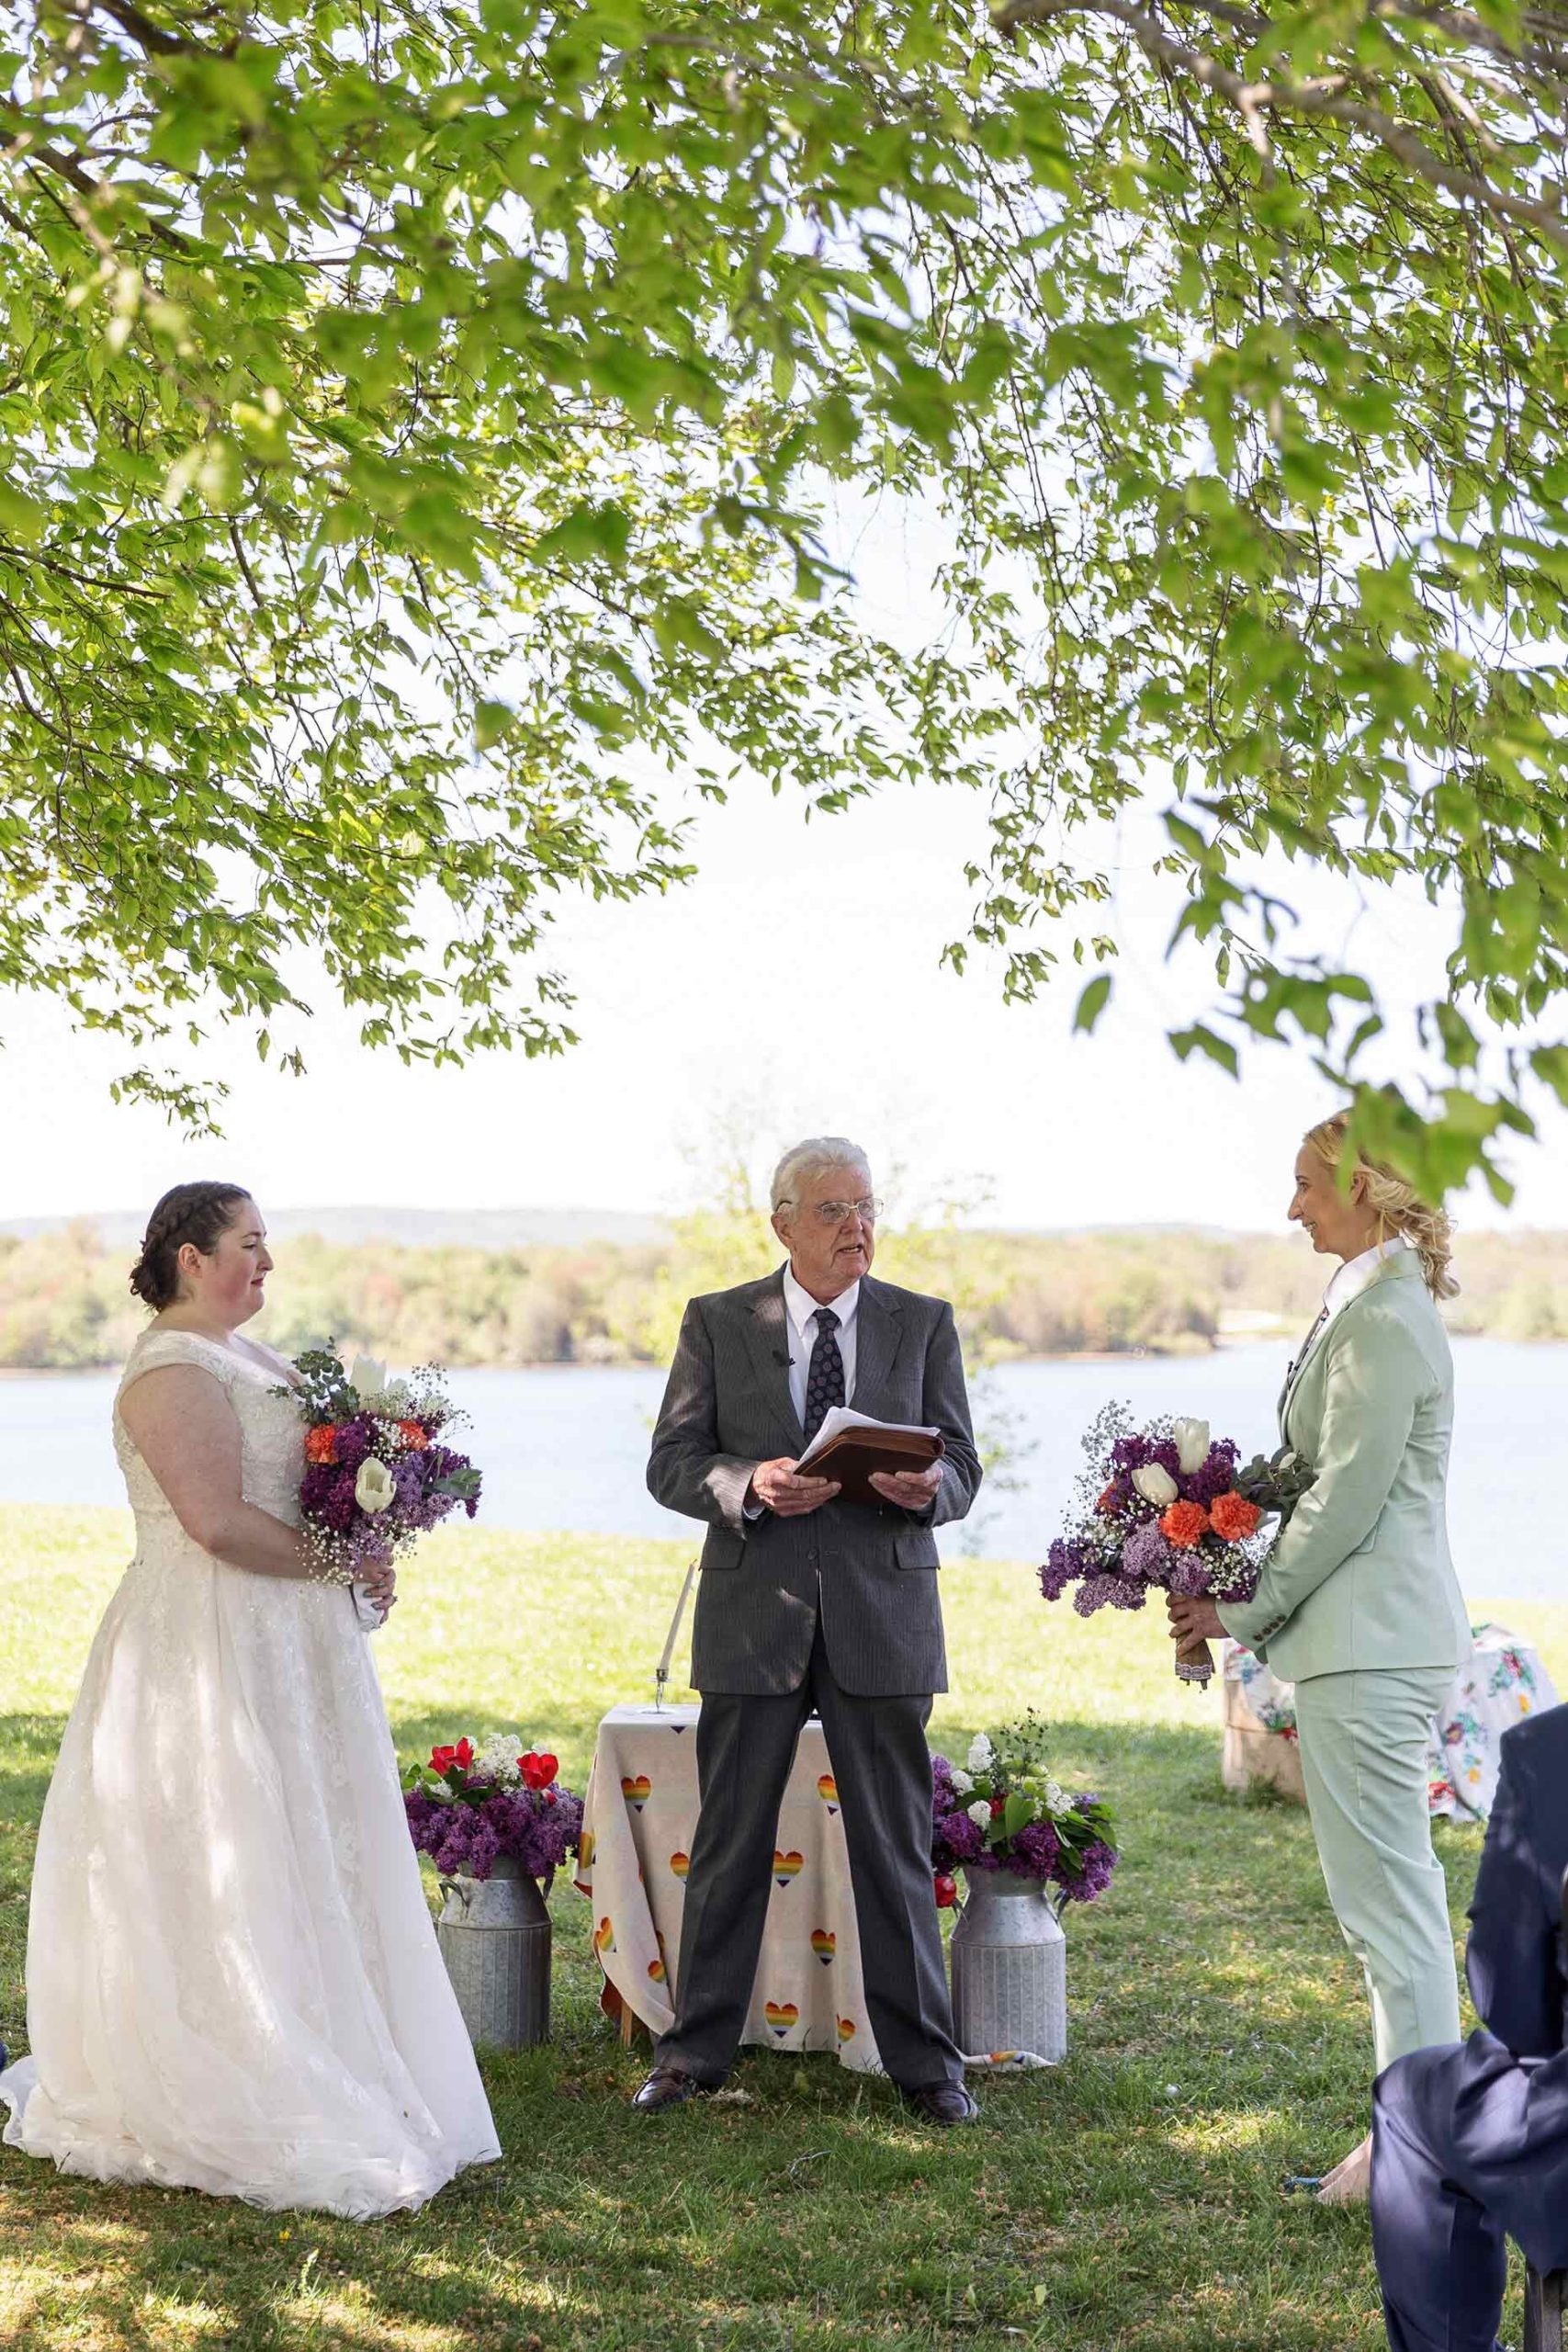 Wives, Wedding Ceremony at the Park